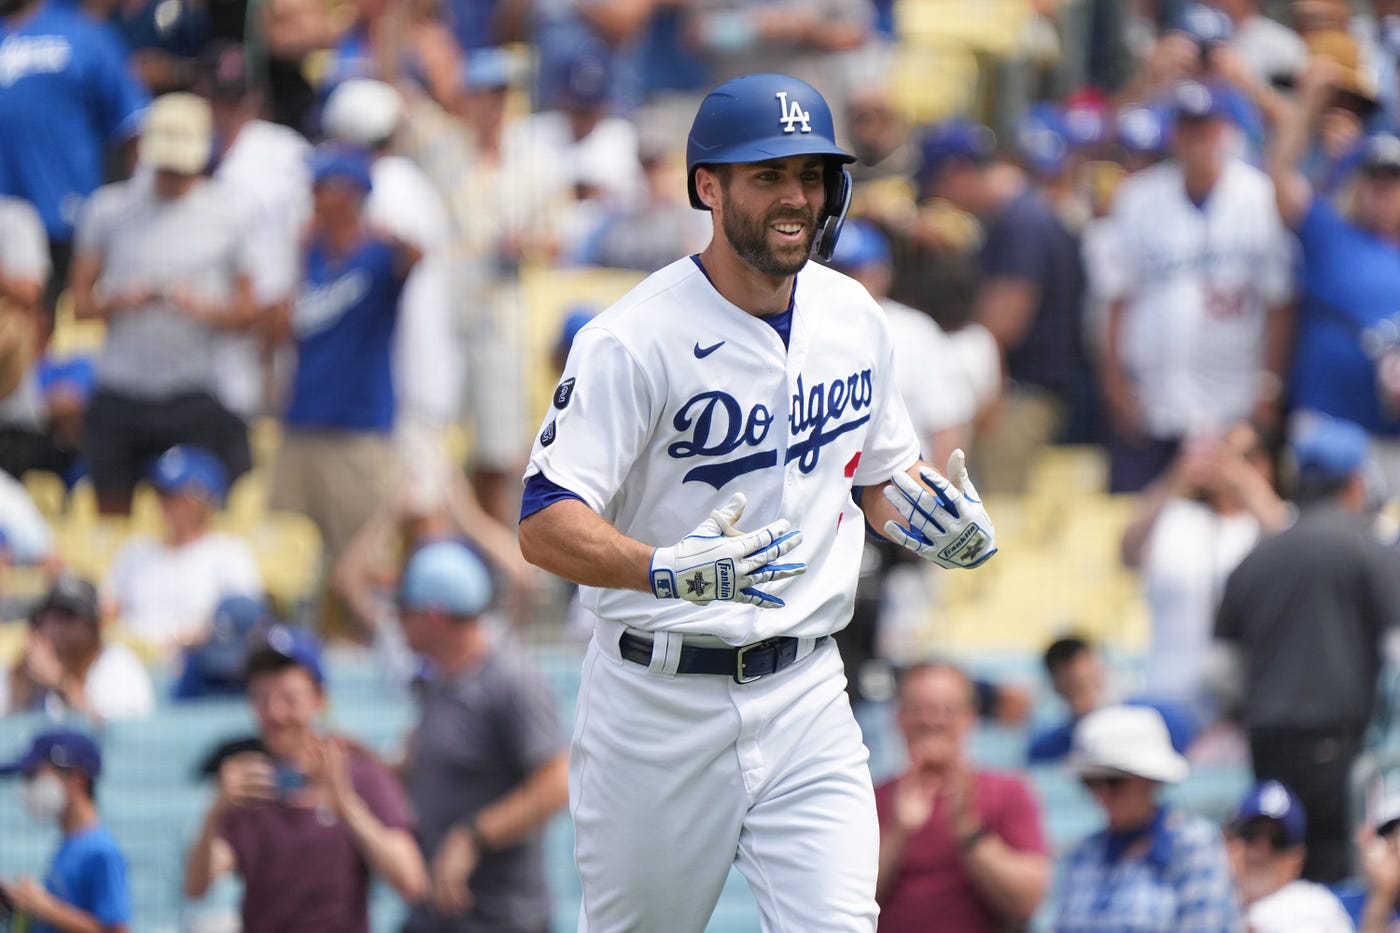 Chris Taylor named NL Player of the Week, by Rowan Kavner